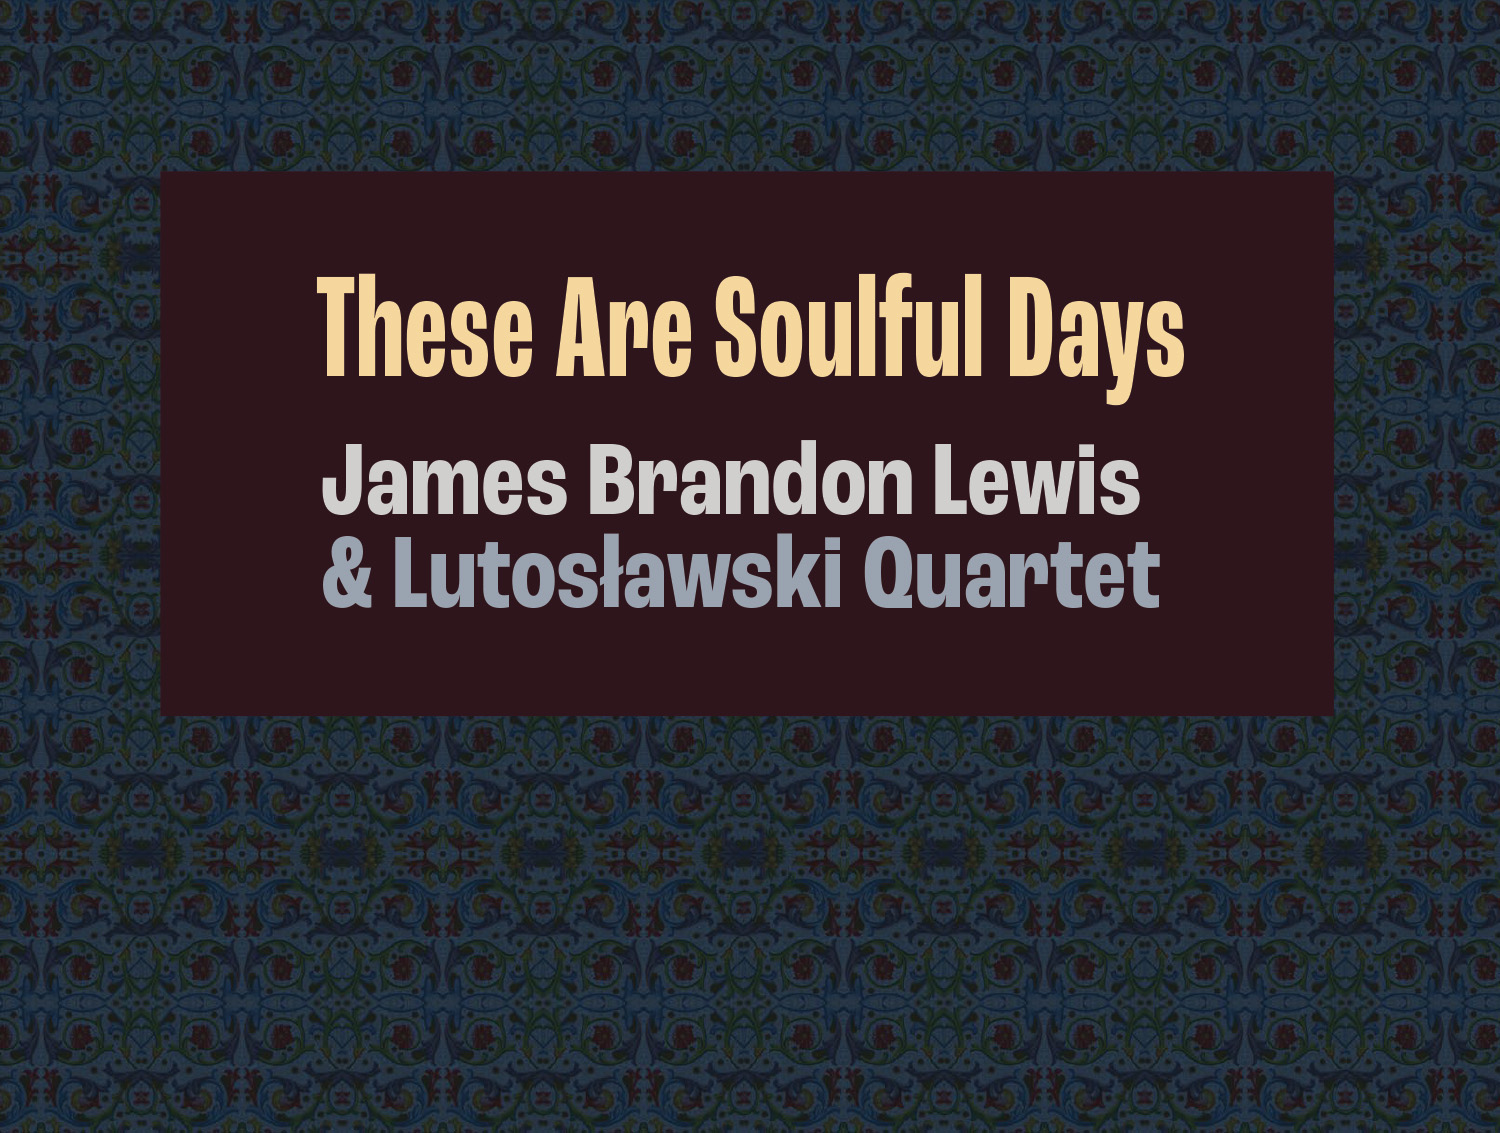 Cover of digital download booklet for For These Soulful Days by James Brandon Lewis